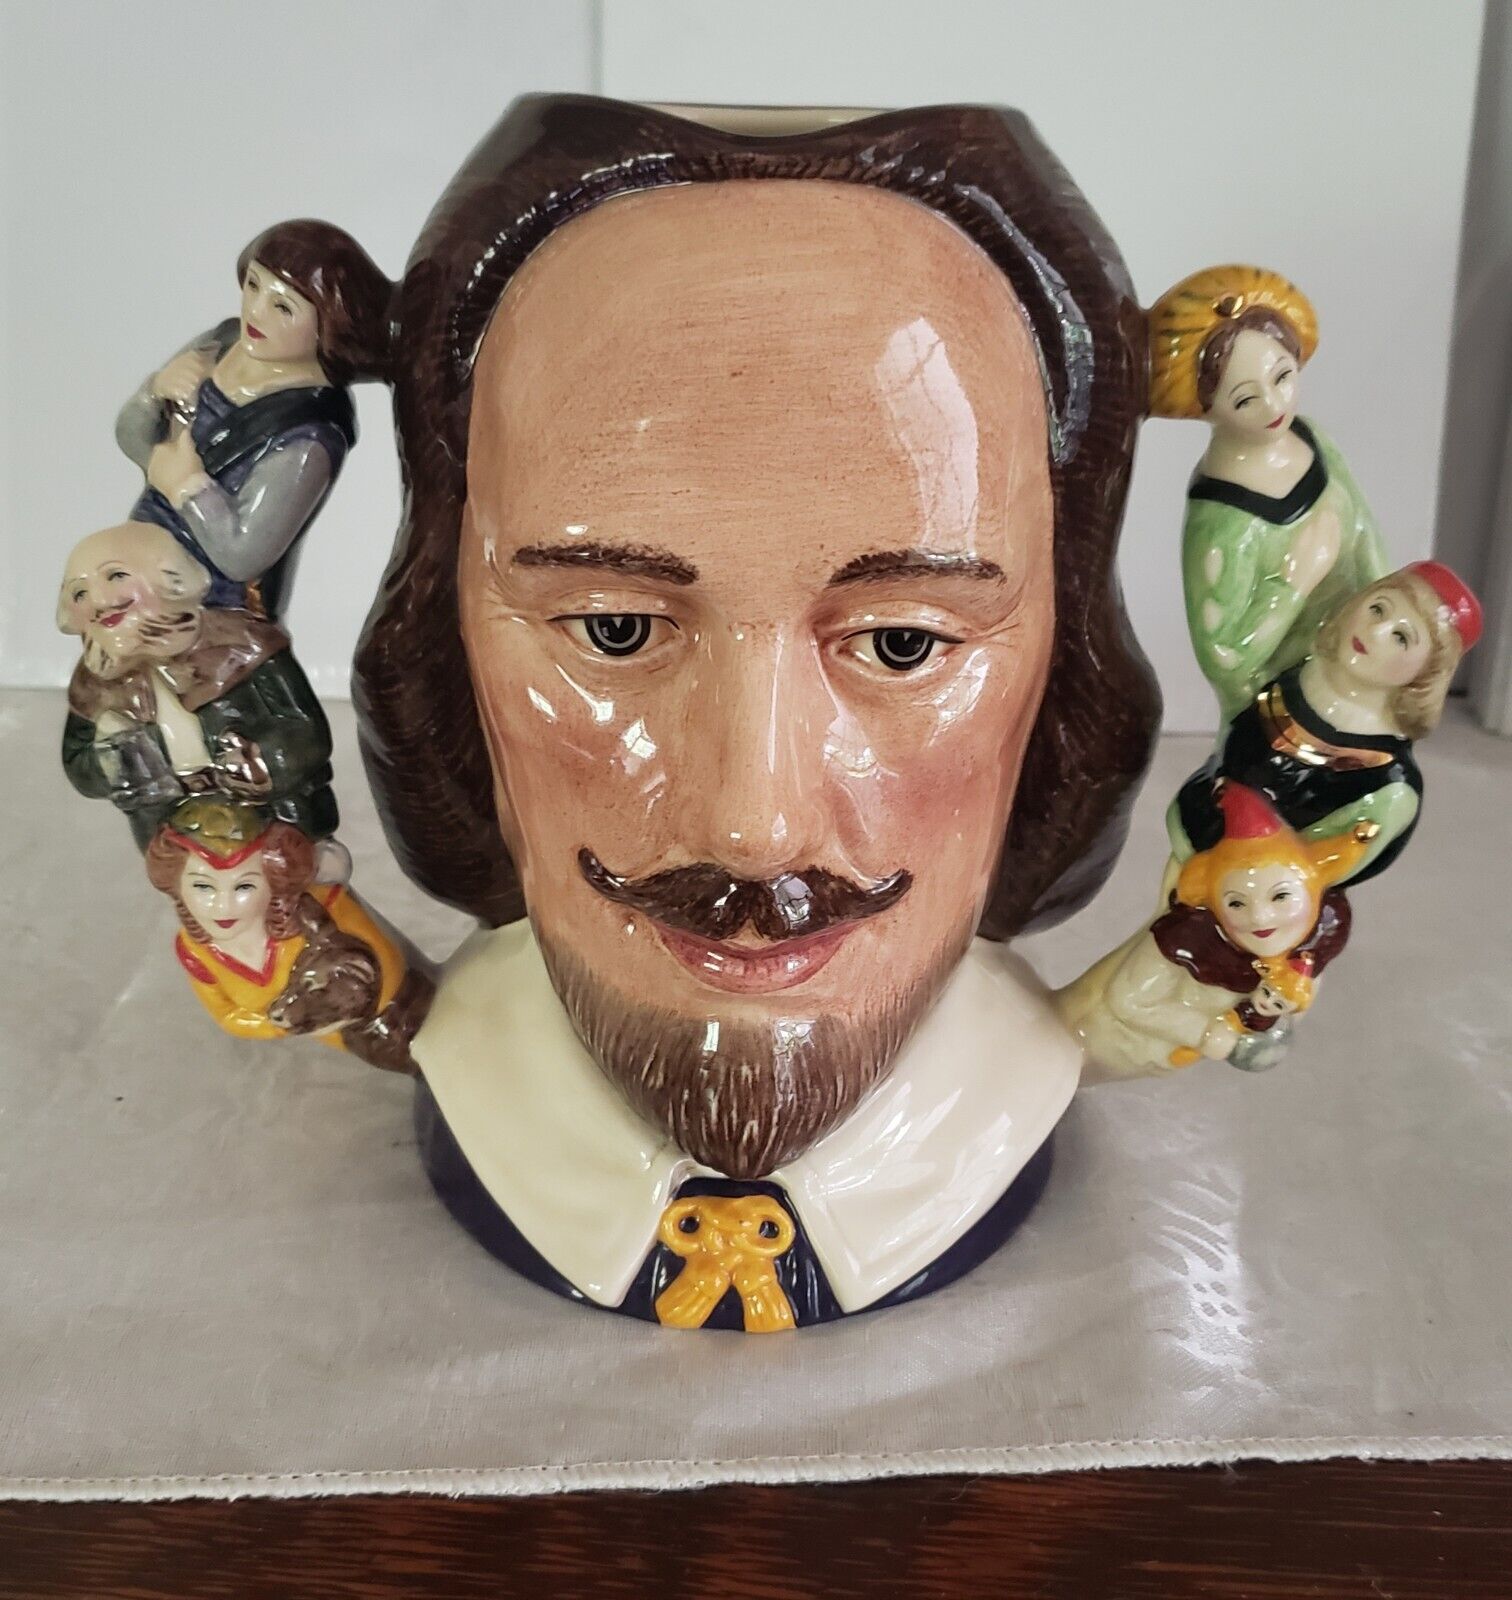 Rare Royal Doulton William Shakespeare Toby Jug  LIMITED EDITION Large 2 Handle